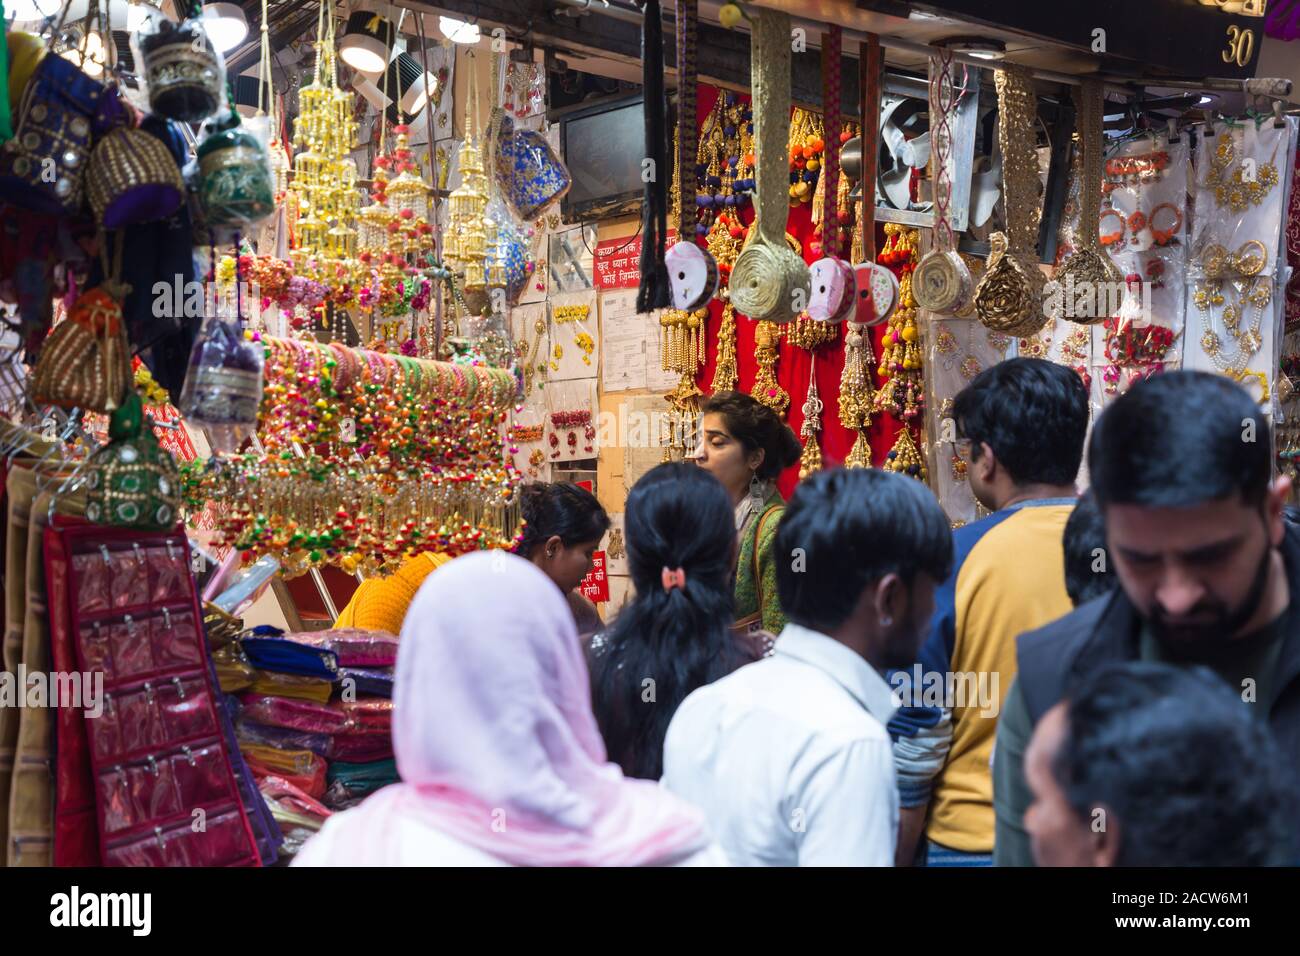 Woman shopping in Chandni Chowk Shop in Old Delhi India Stock Photo